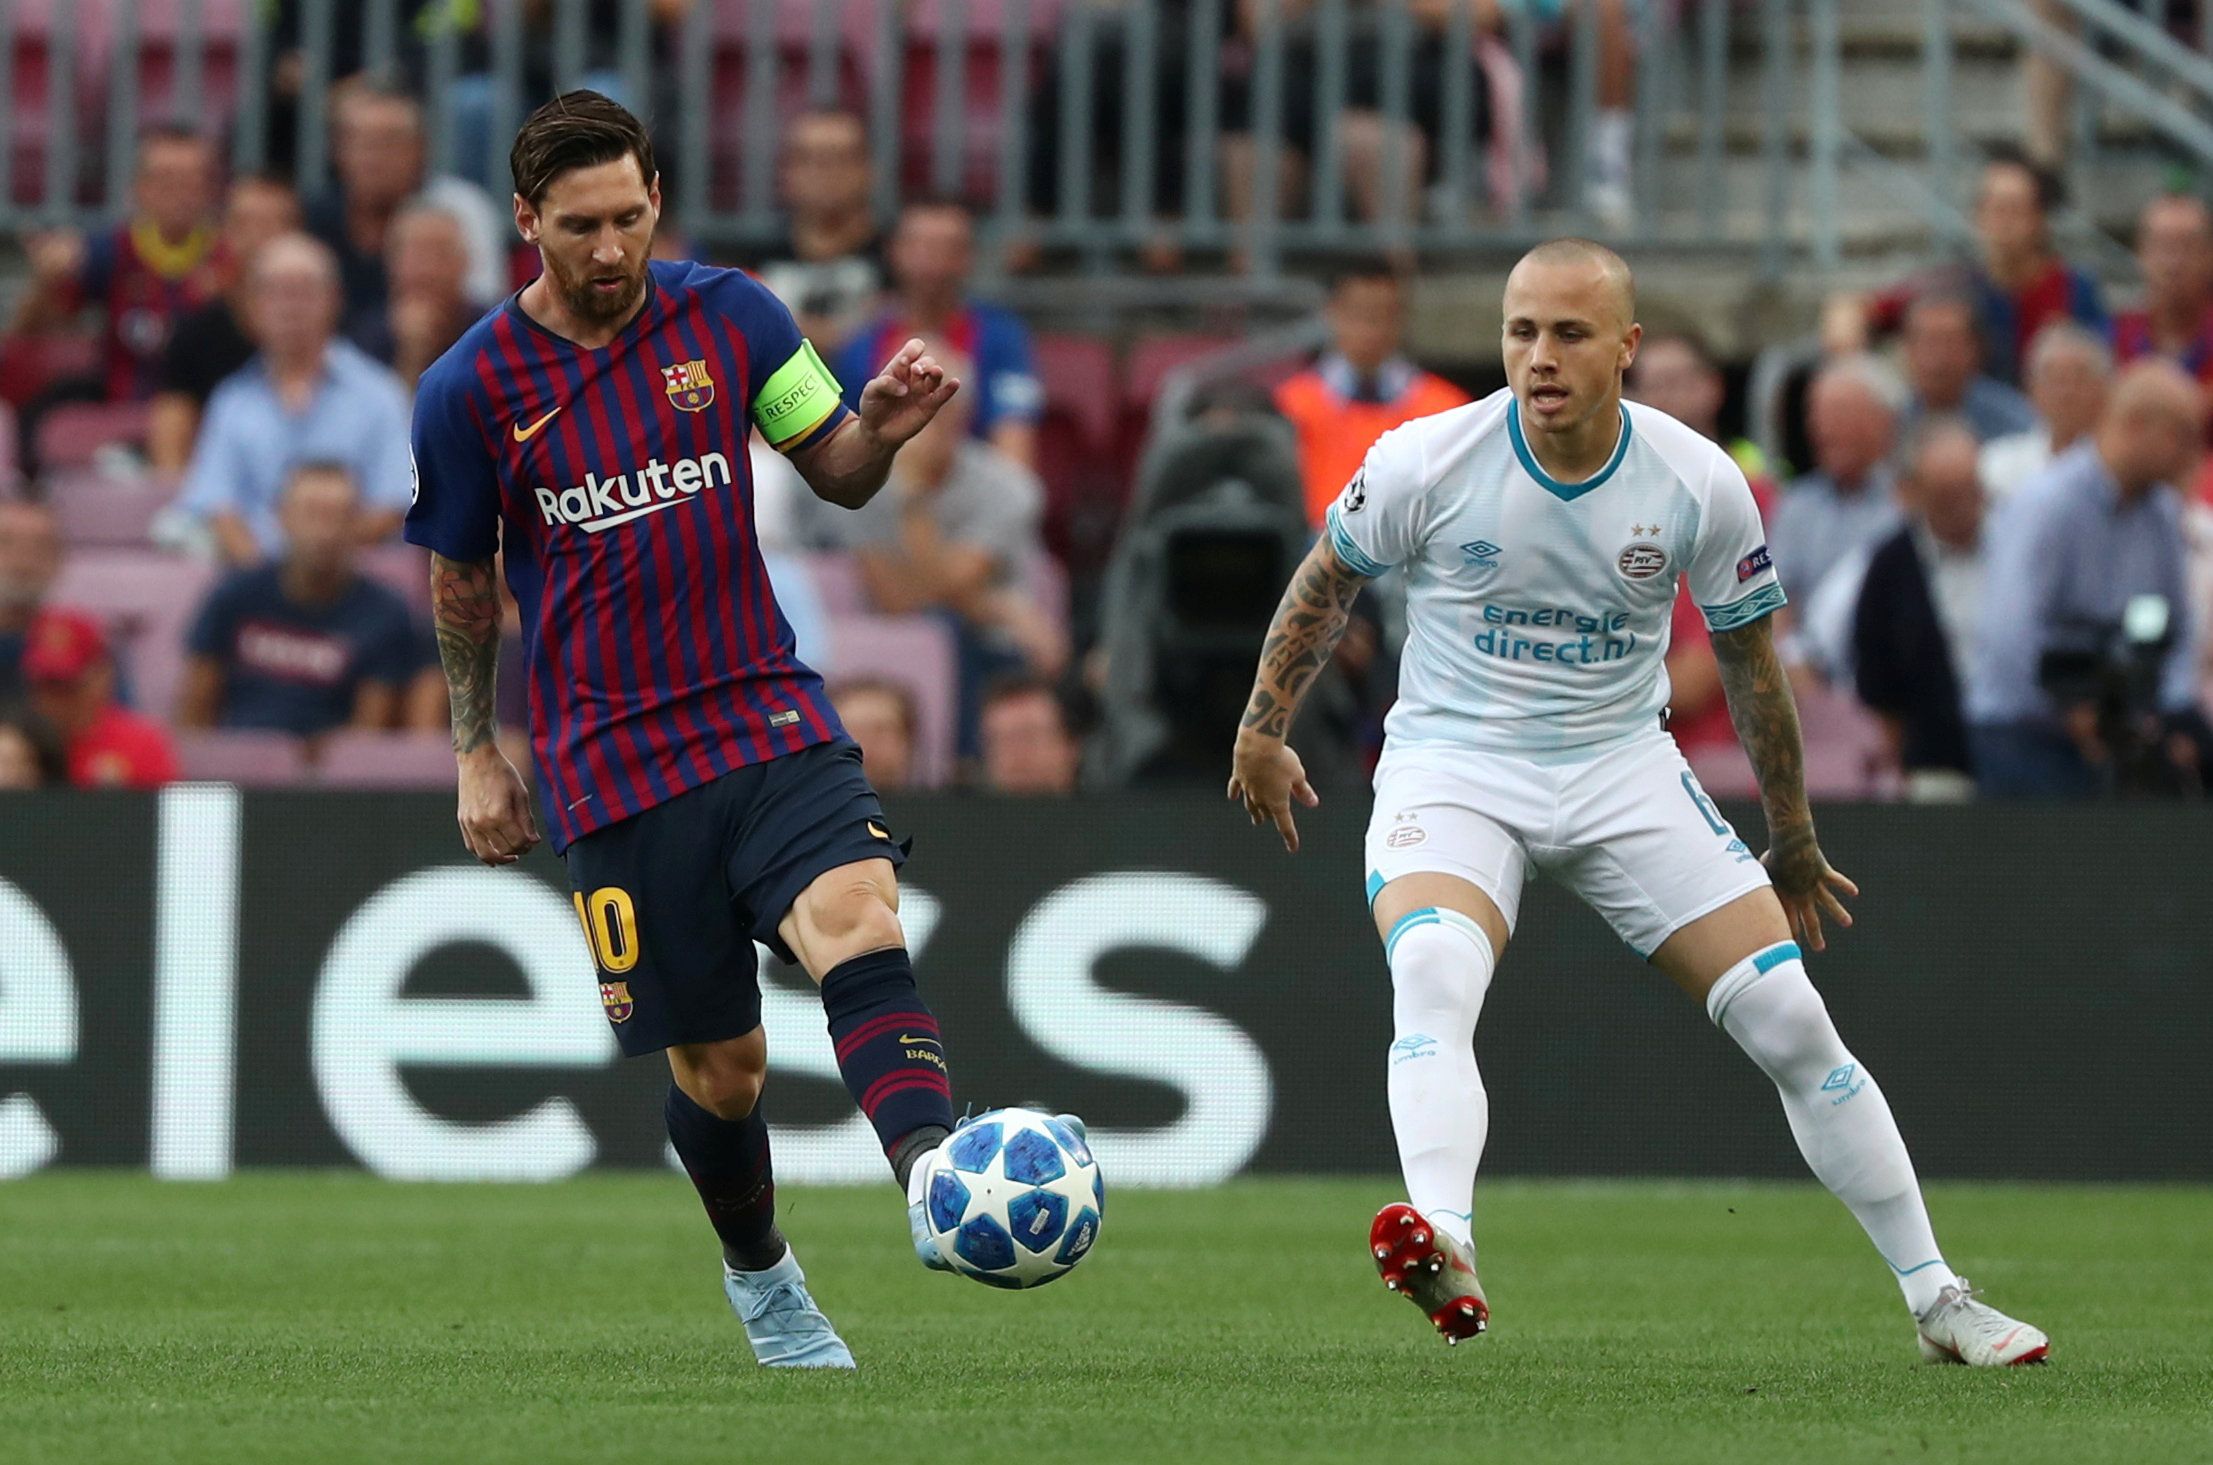 Soccer Football - Champions League - Group Stage - Group B - FC Barcelona v PSV Eindhoven - Camp Nou, Barcelona, Spain - September 18, 2018  Barcelona's Lionel Messi in action with PSV Eindhoven's Angelino  REUTERS/Sergio Perez